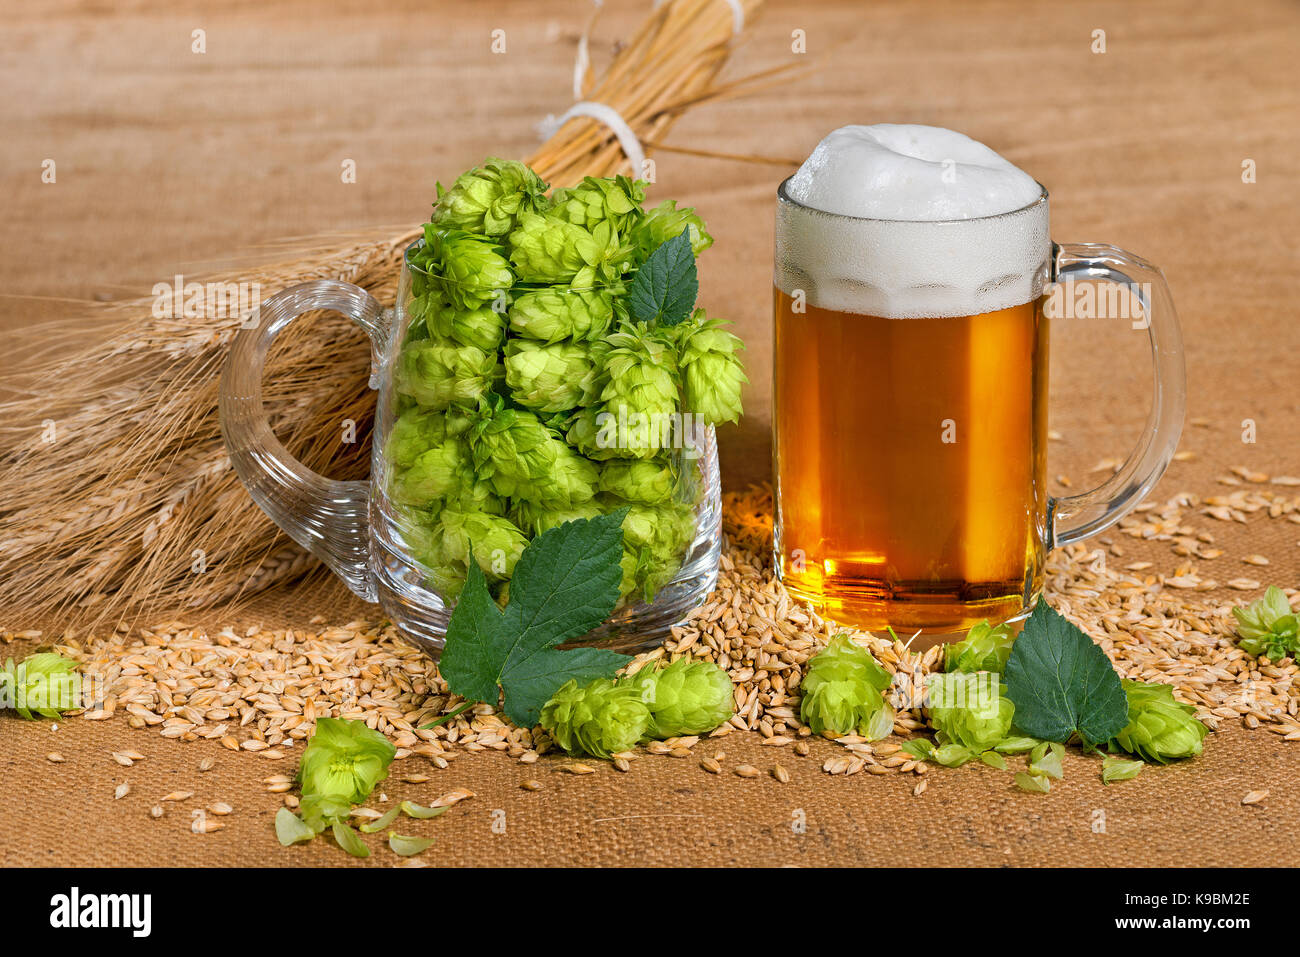 Glass of beer with raw material for beer production Stock Photo